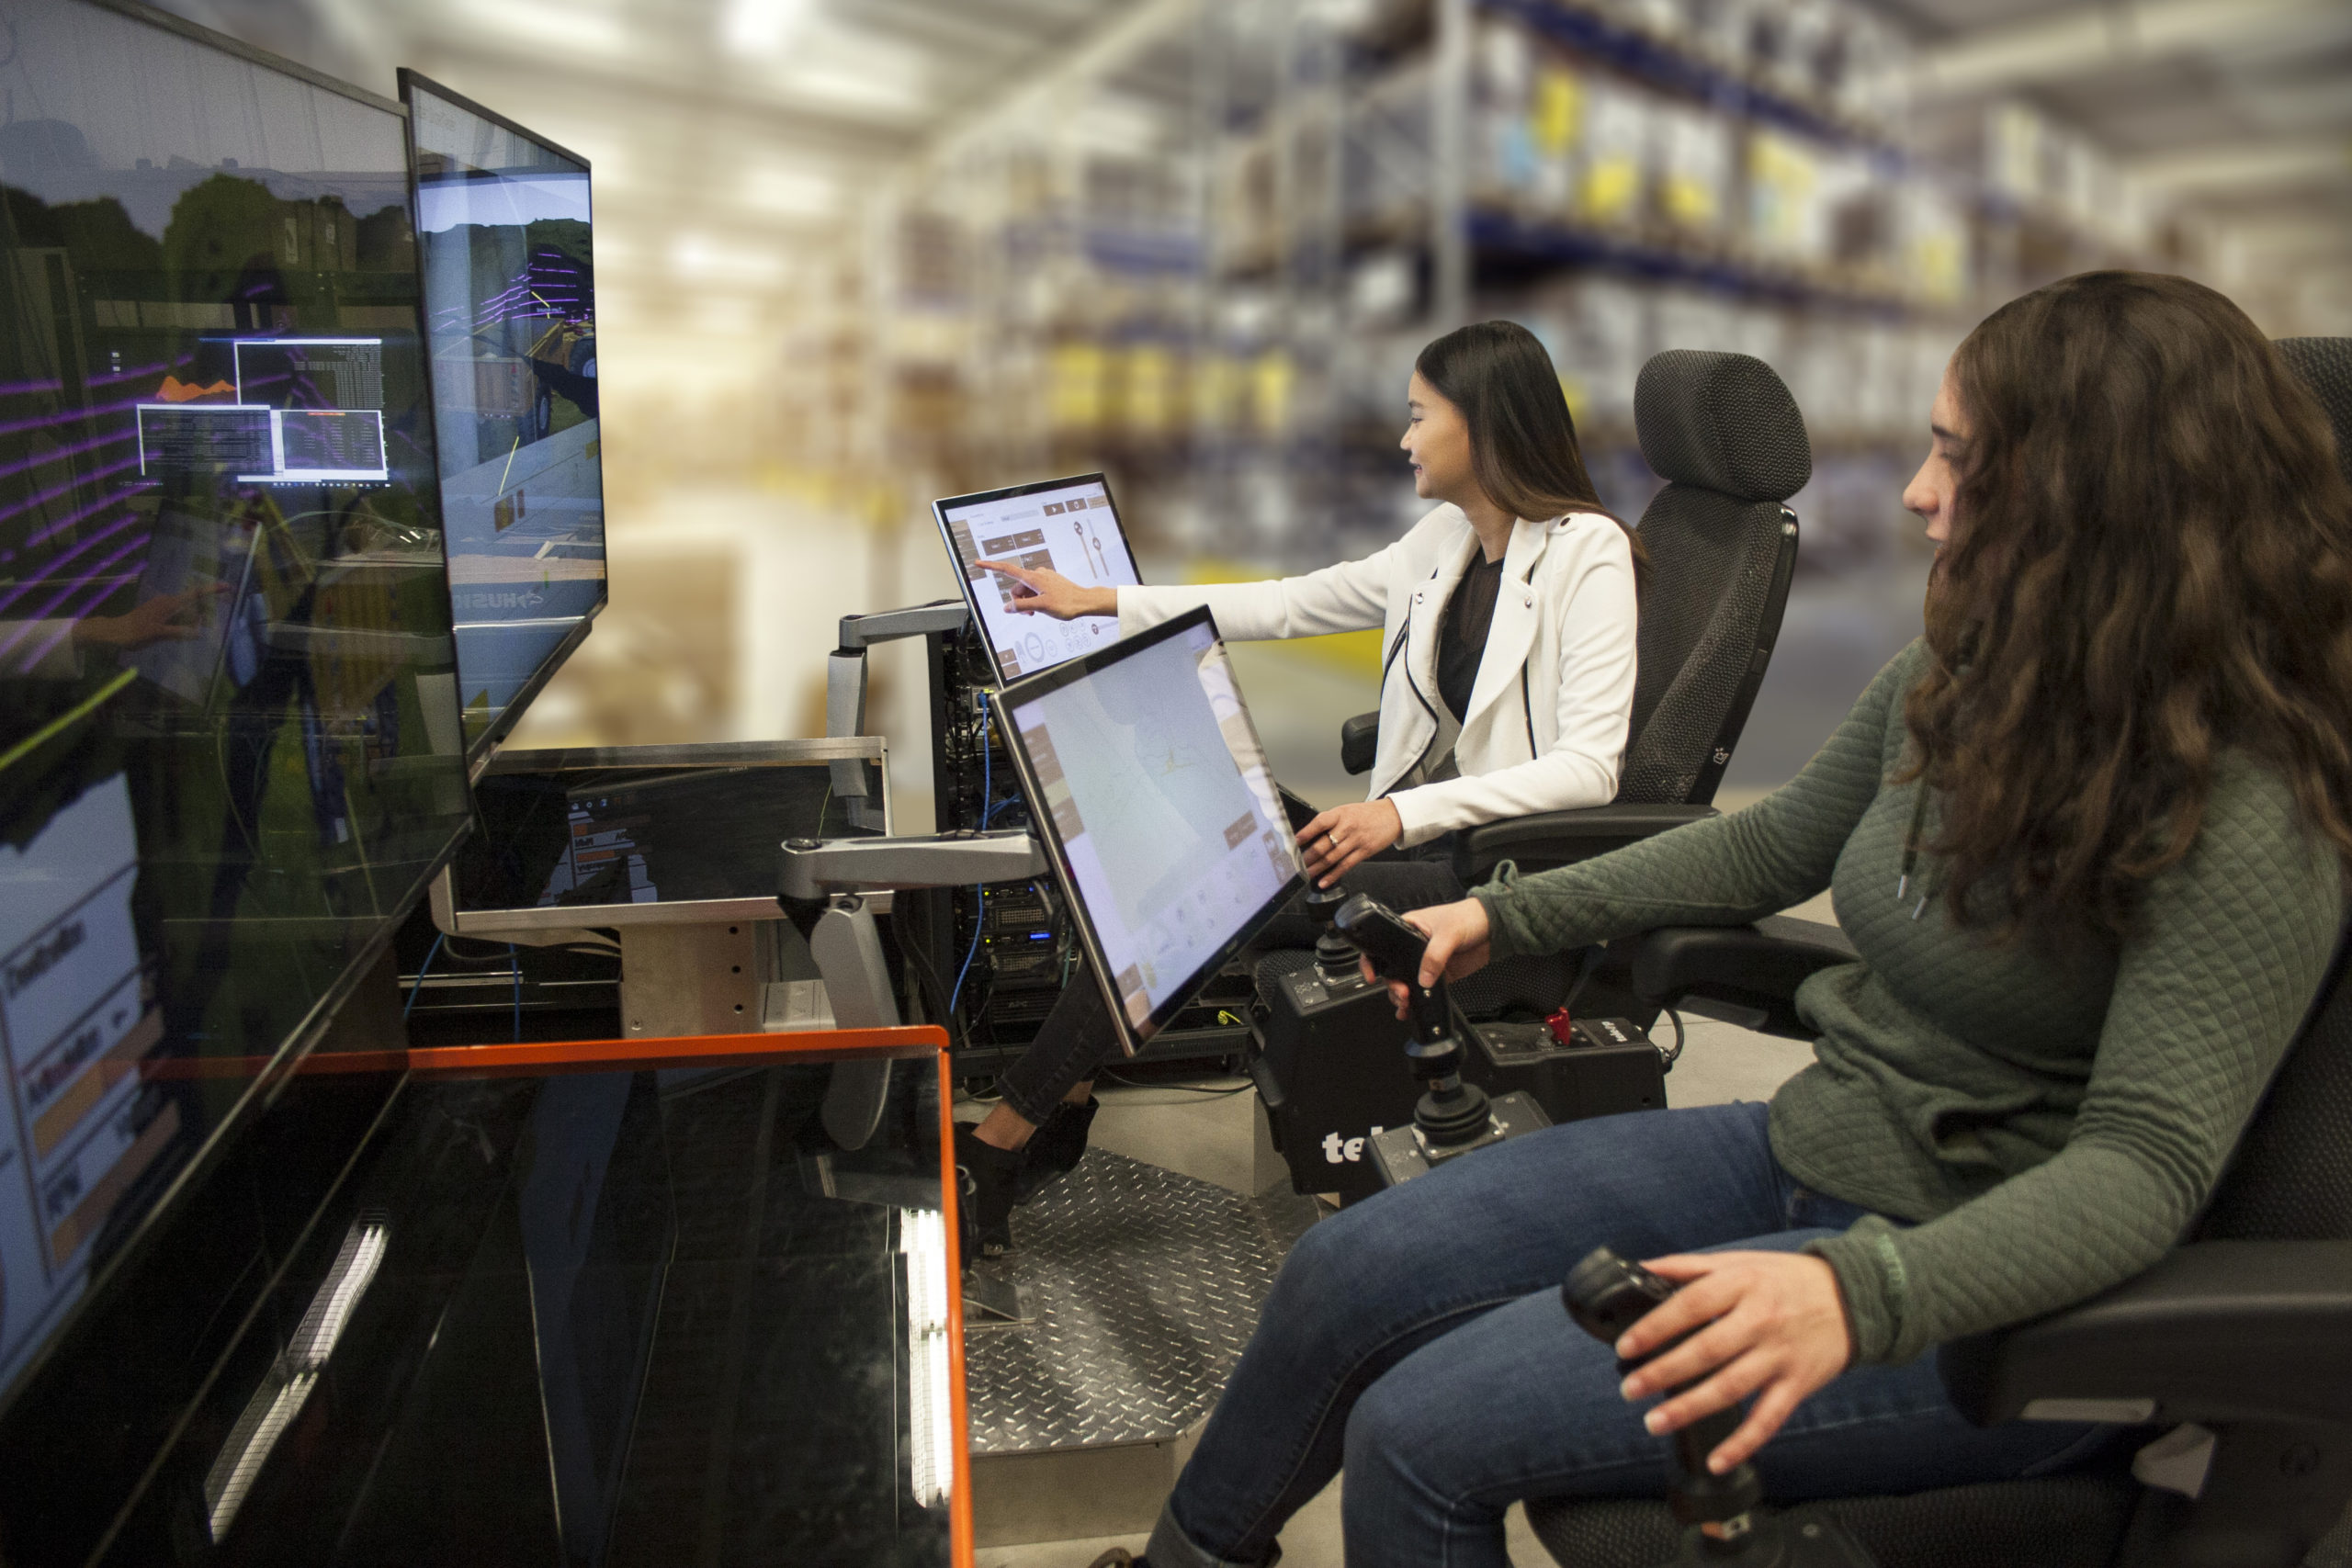 TeleOp Chairs in use by HARD-LINE Employees